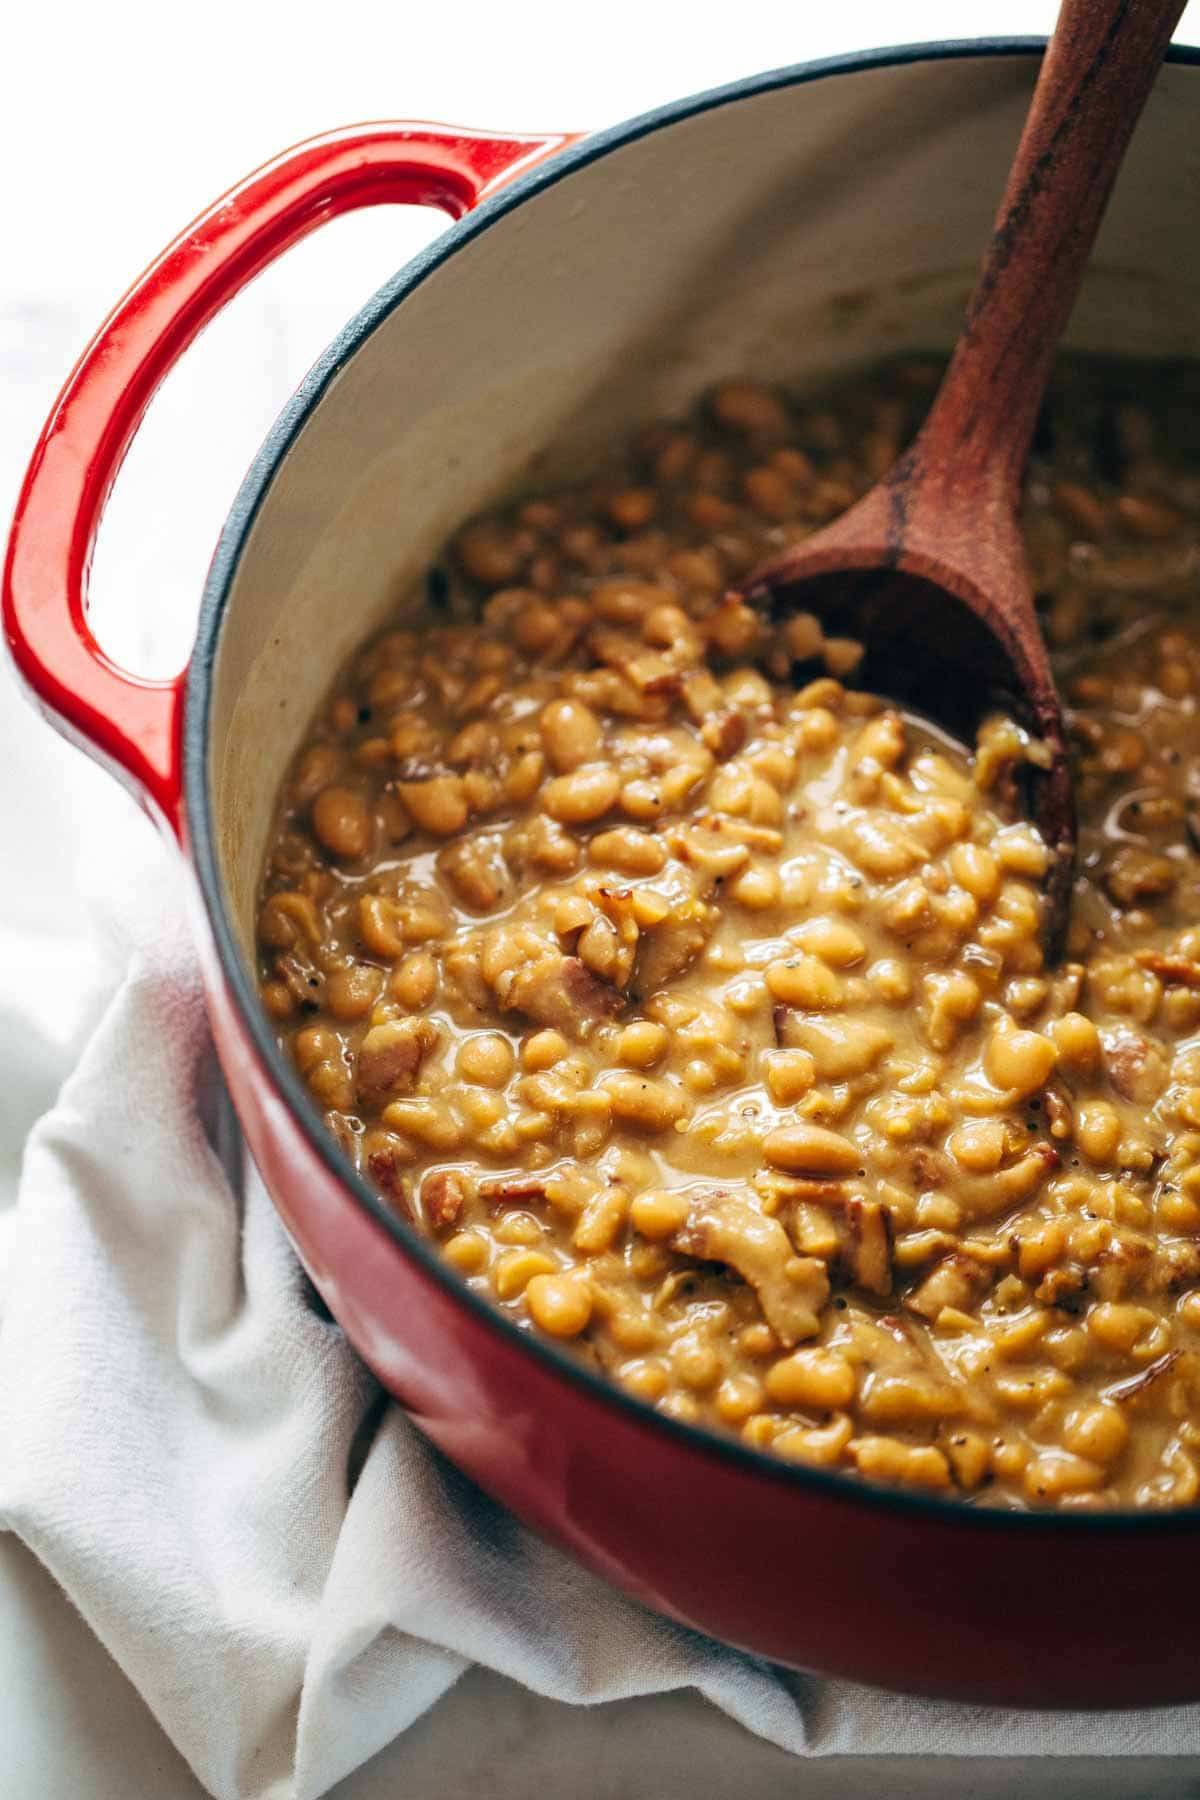 Homemade Brown Sugar Baked Beans! They are saucy, semi-creamy, brown sugar sweet + smoky bacon salty, and deliciously comforting. Five basic ingredients! | pinchofyum.com